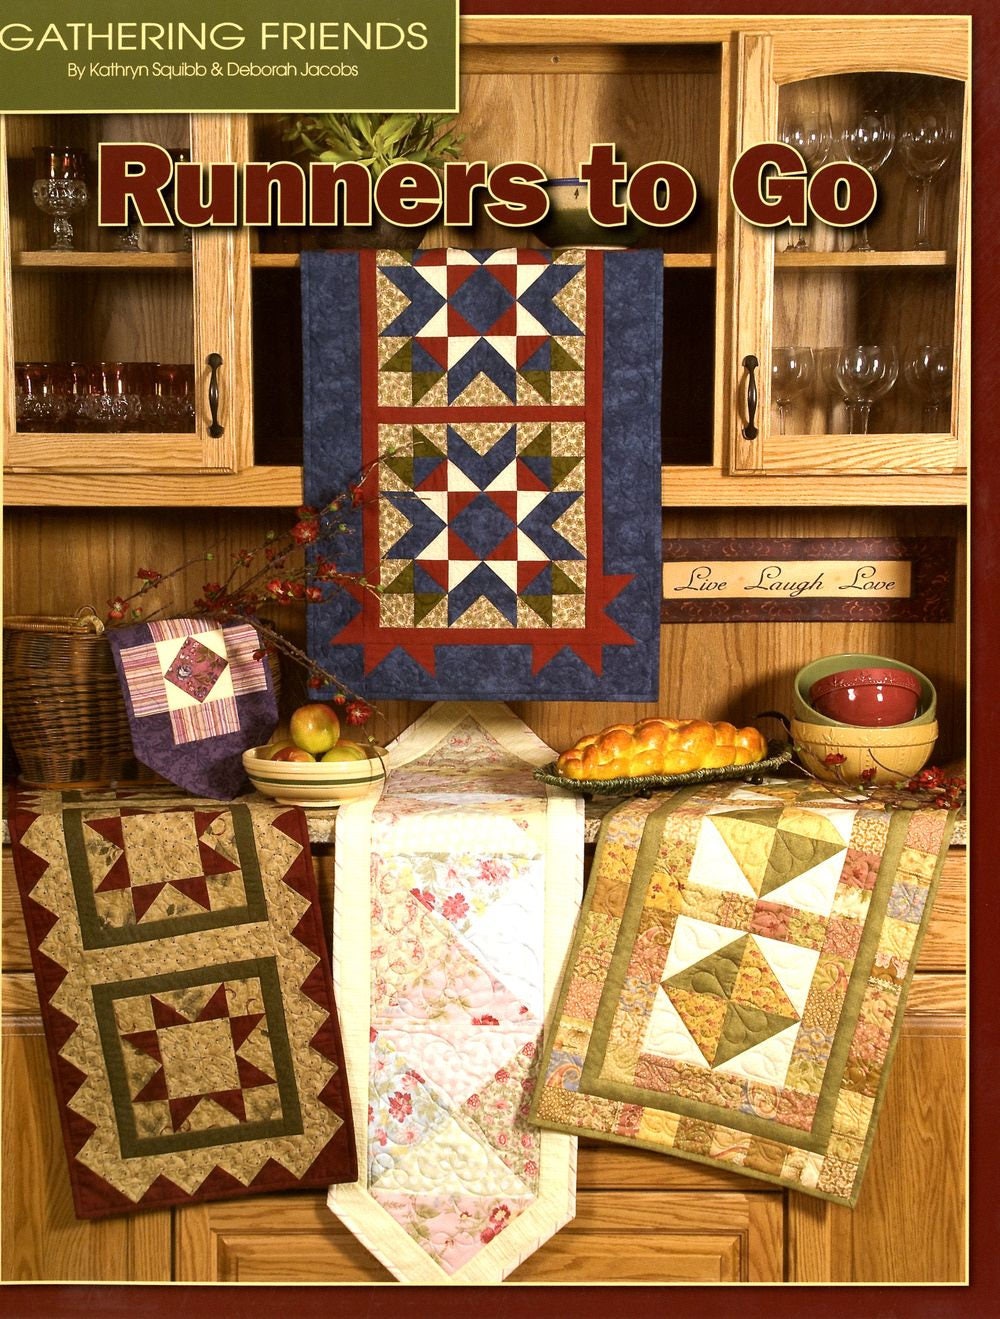 Runners to Go Quilt Pattern Book by Kathryn Squibb of Gathering Friends